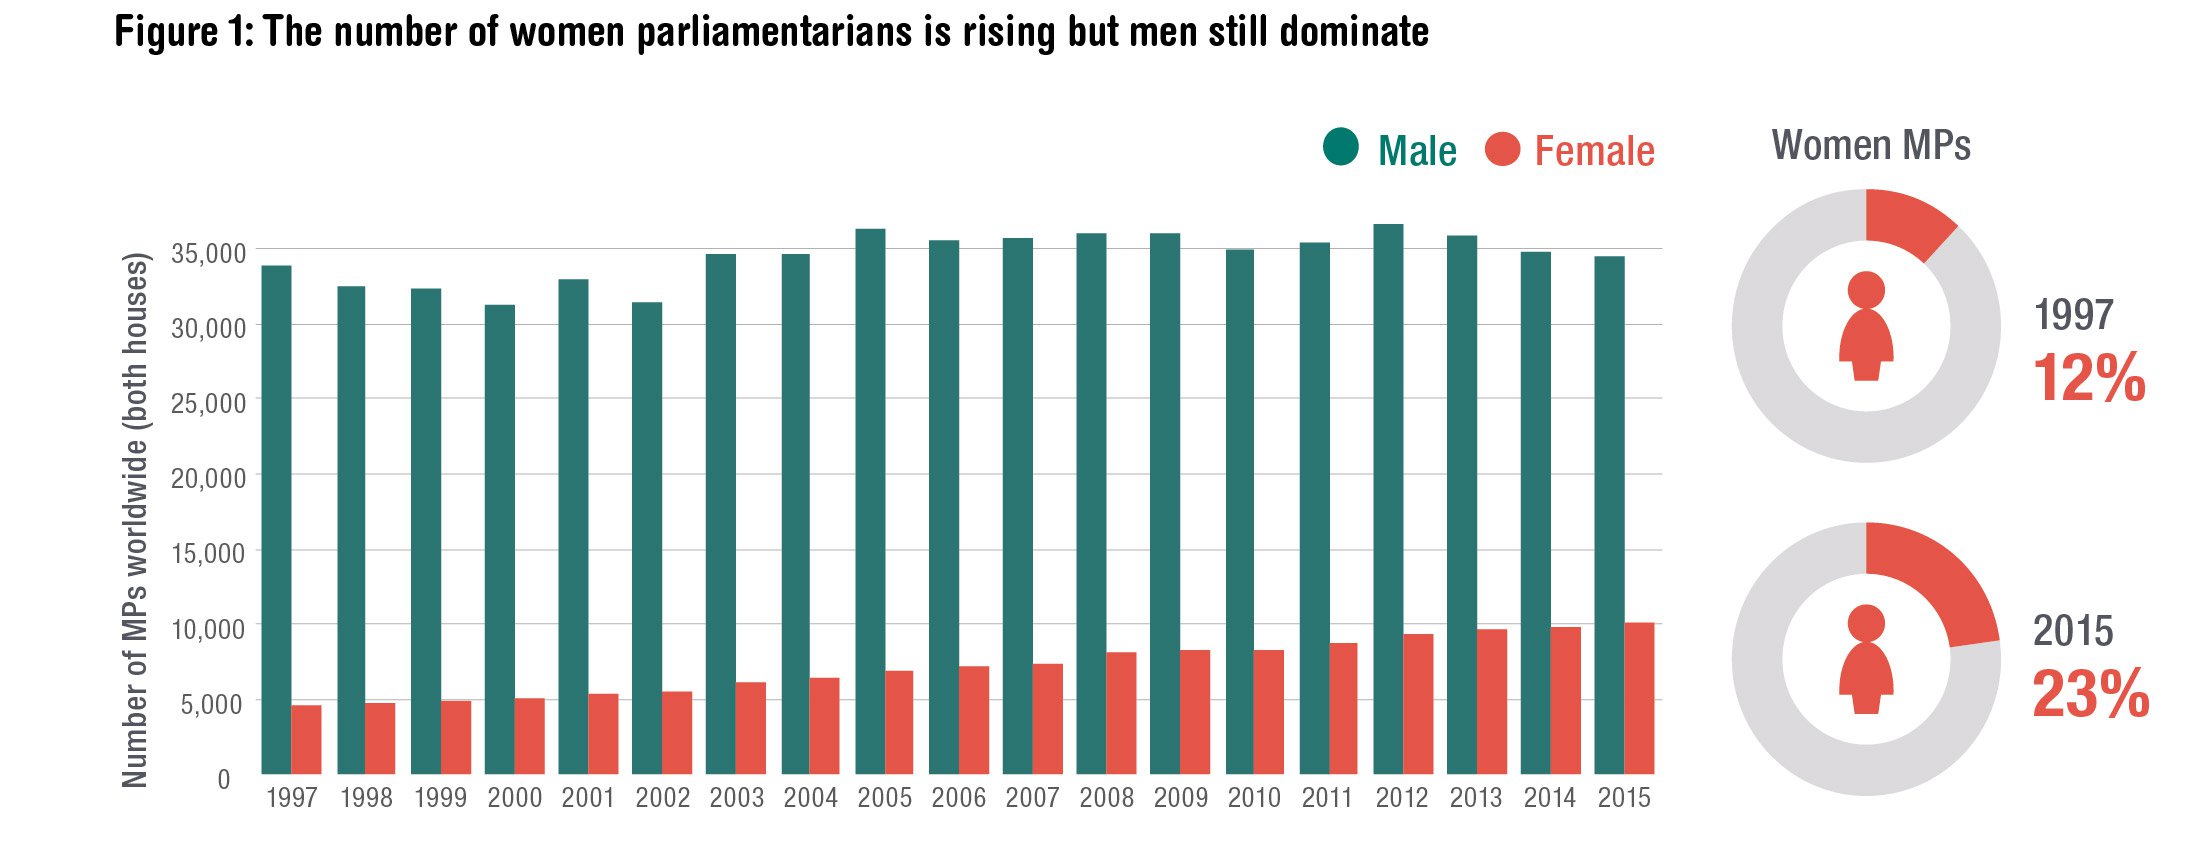 The number of women in parliament is rising, but men still dominate. Source: ODI